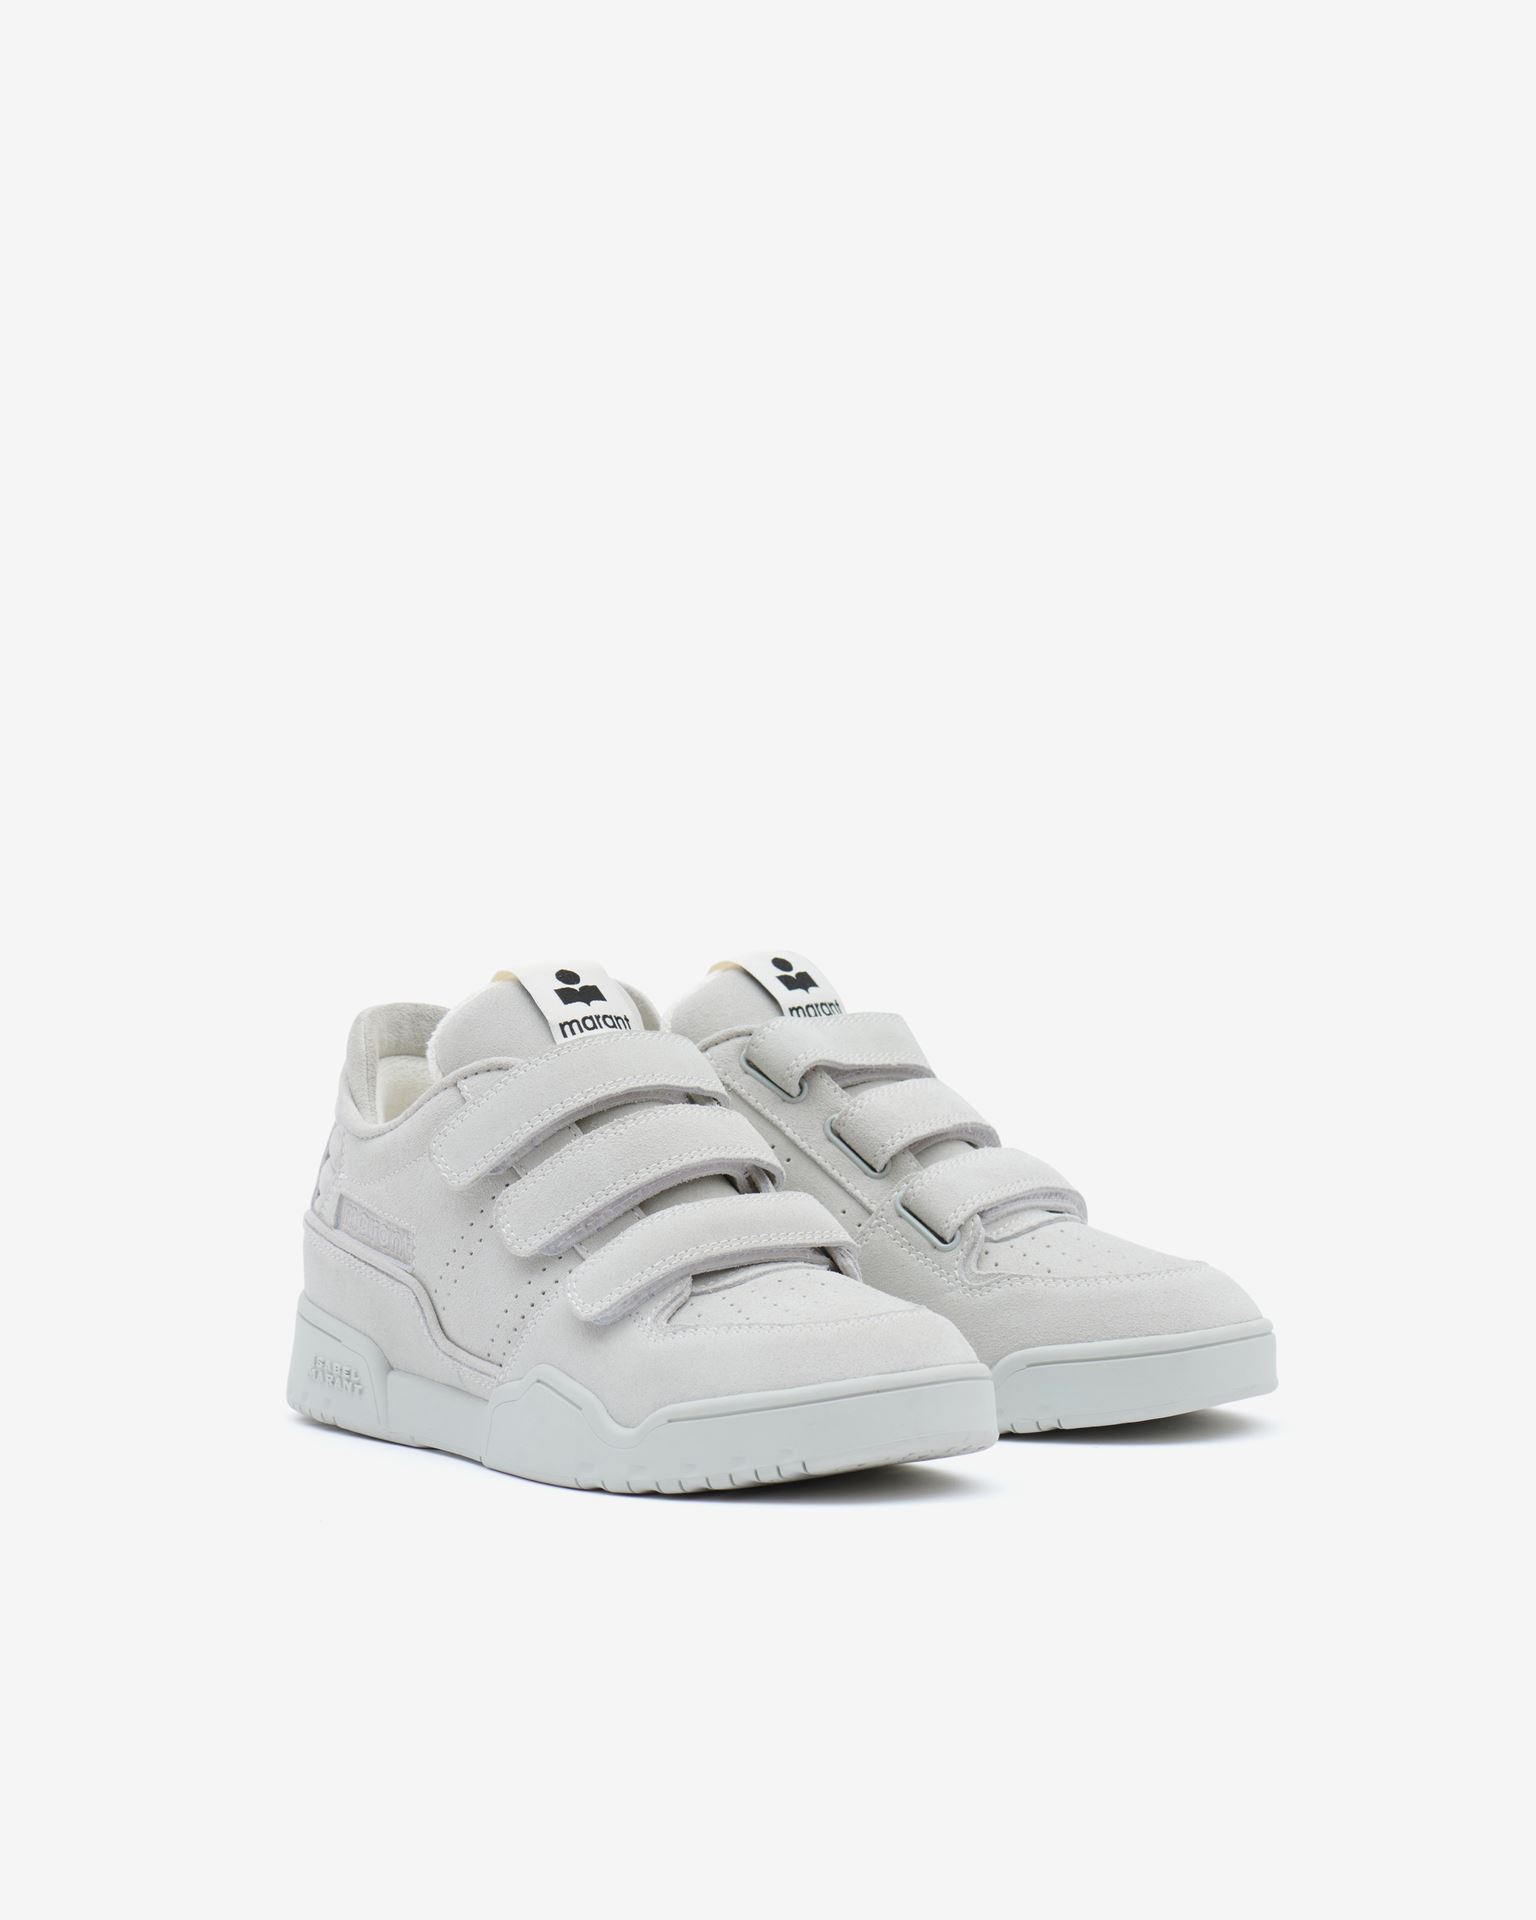 Isabel Marant, Oney Low Sneakers - Donna - Bianco